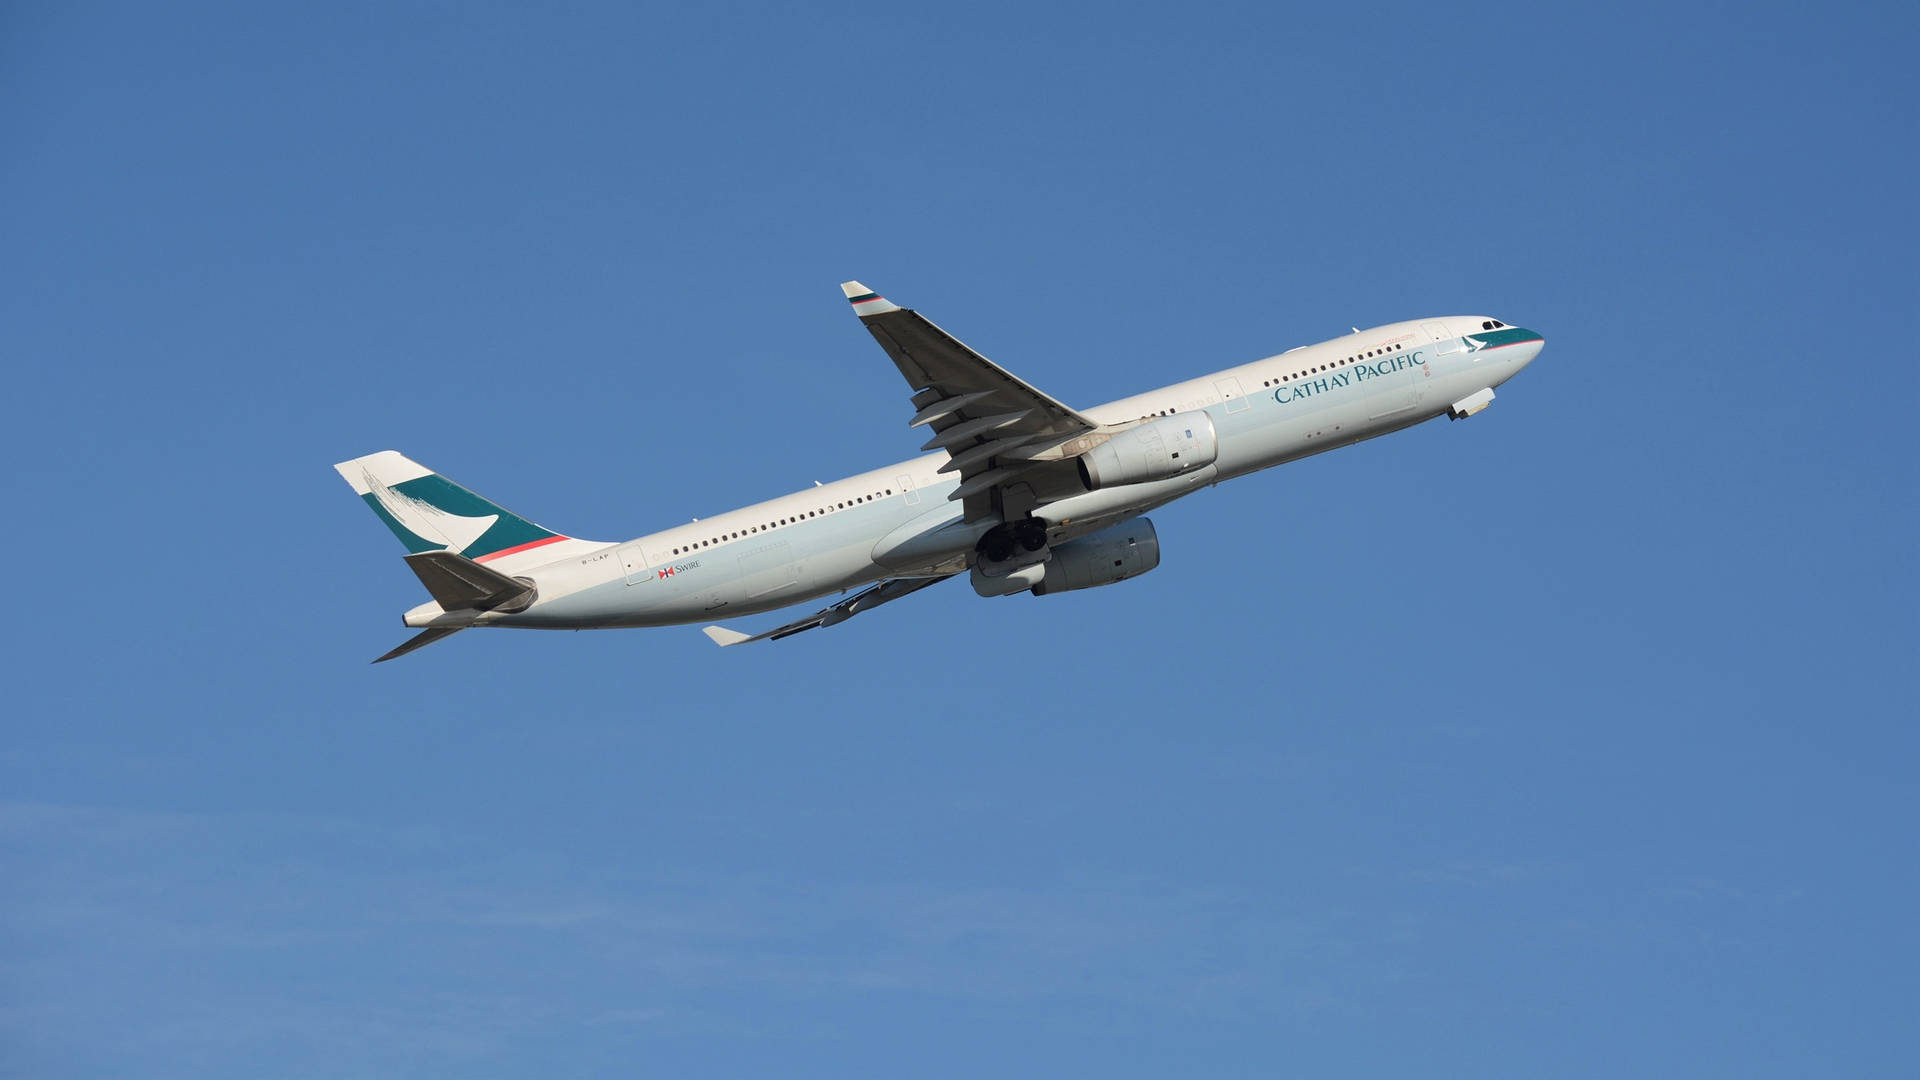 Cathay Pacific Plain Blue Sky Wallpaper